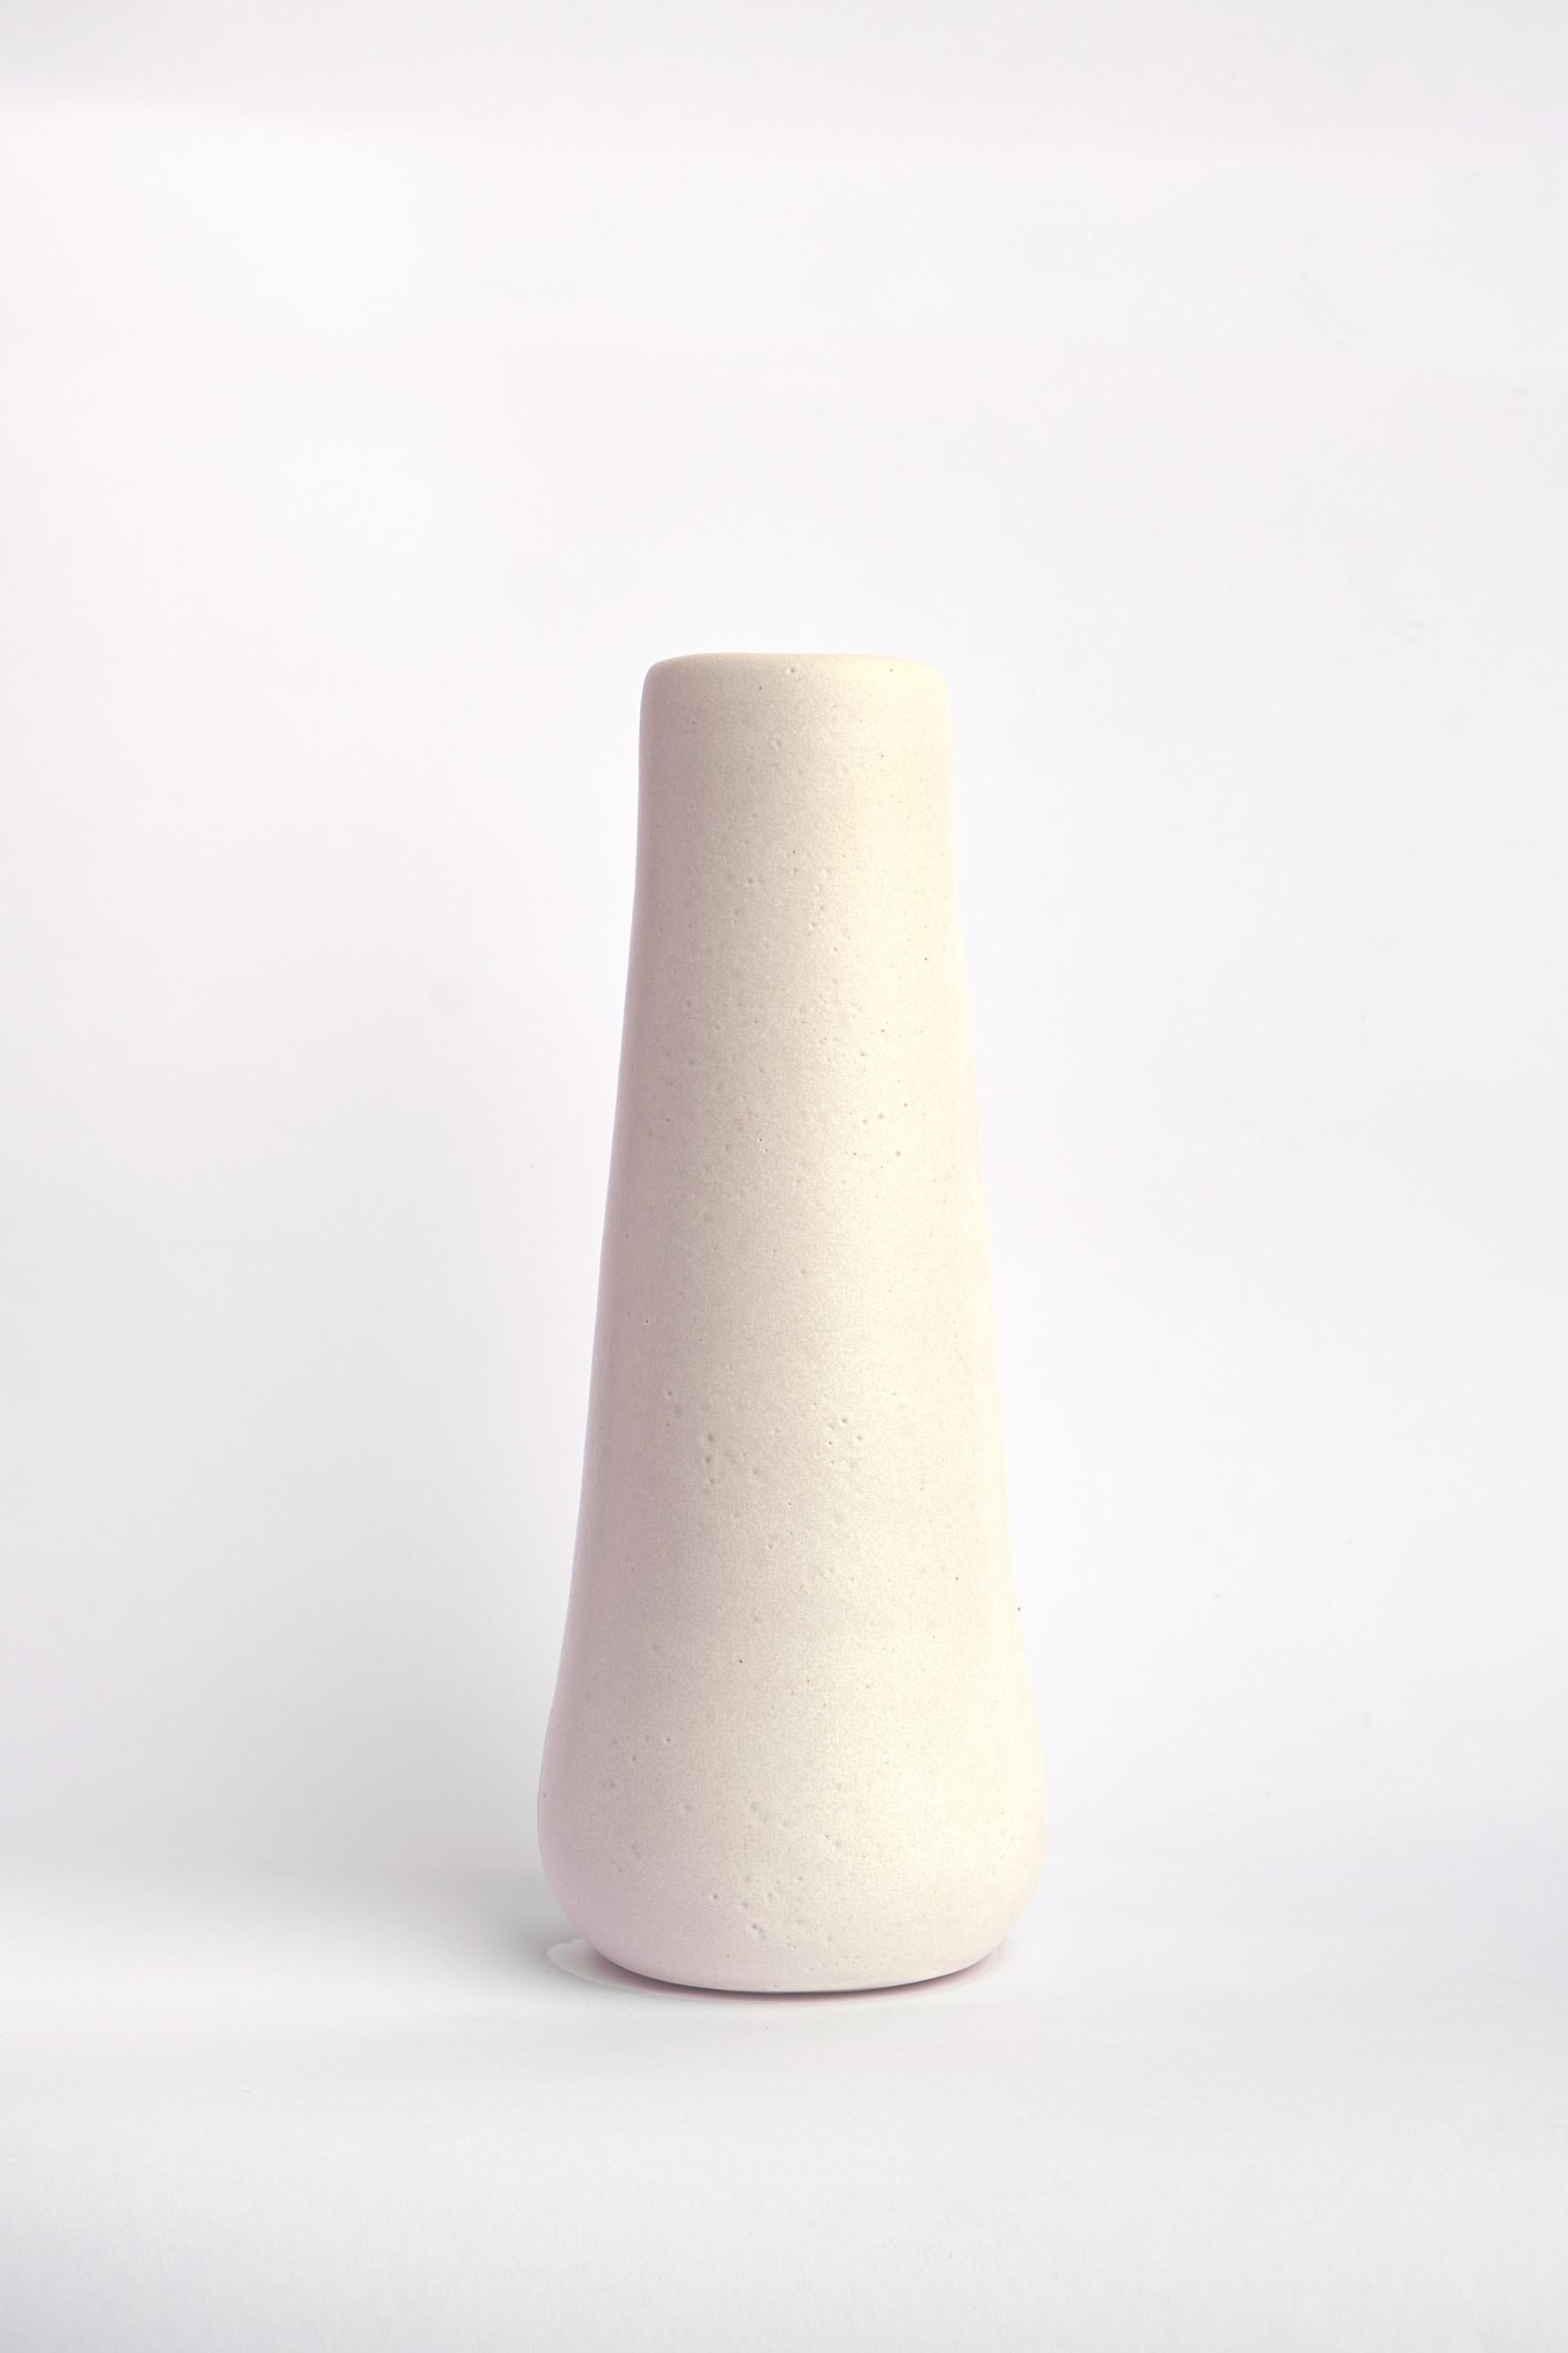 Solitario II Vase by Camila Apaez
Materials: Ceramic
Dimensions: 10 x H 25 cm
Options: White Bone, Chocolate, Charcoal black, Natural, Barro tostado.

Additional pictures are just references for other color possibilities: White bone, Chocolate,